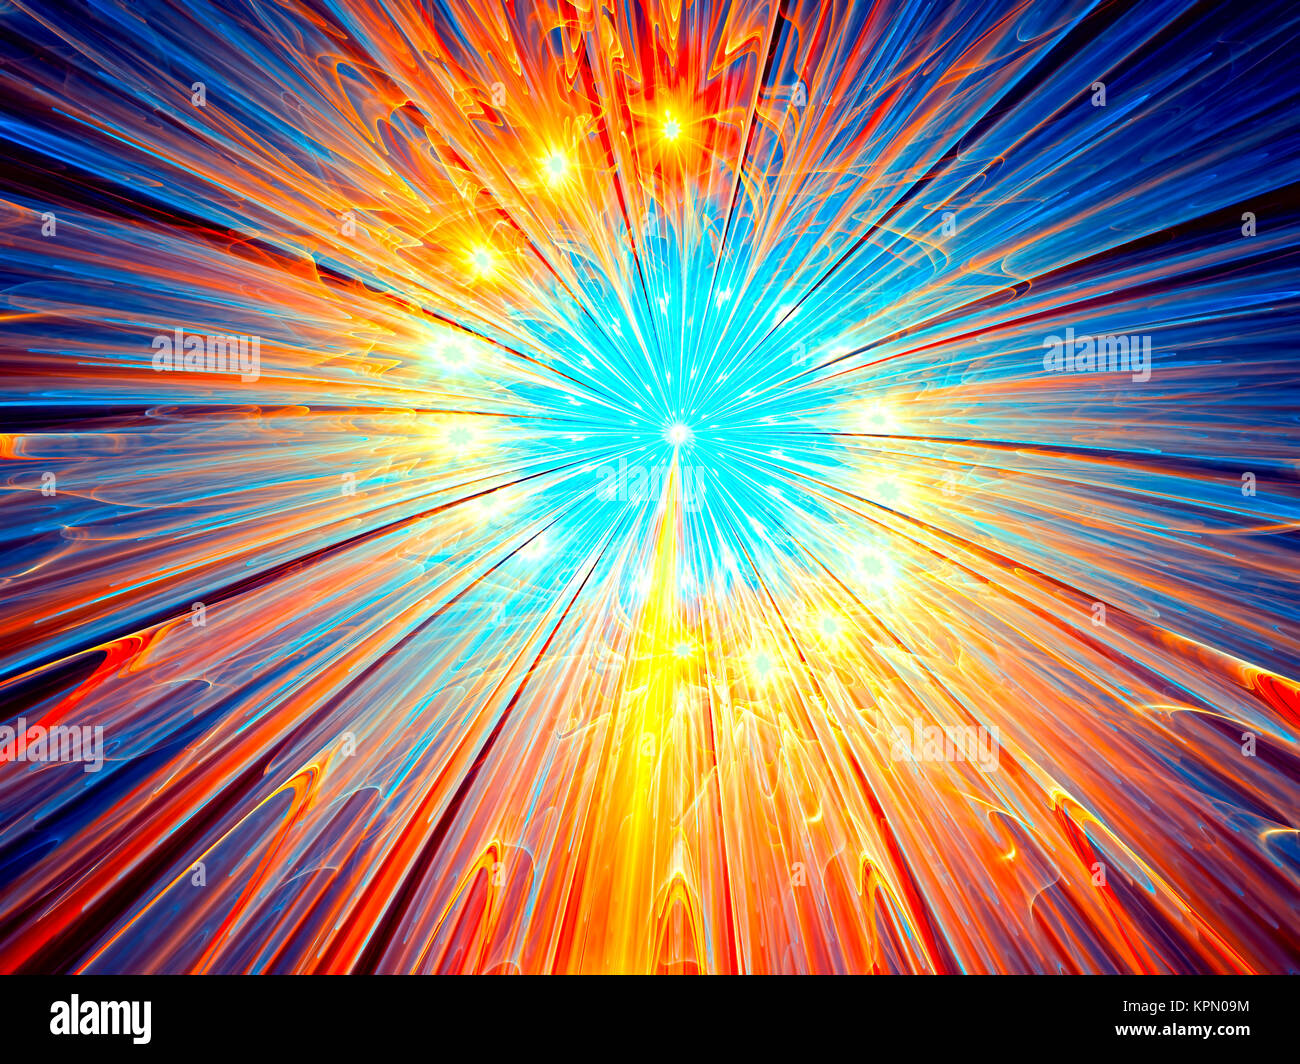 Abstract digitally generated image spiral of stars Stock Photo